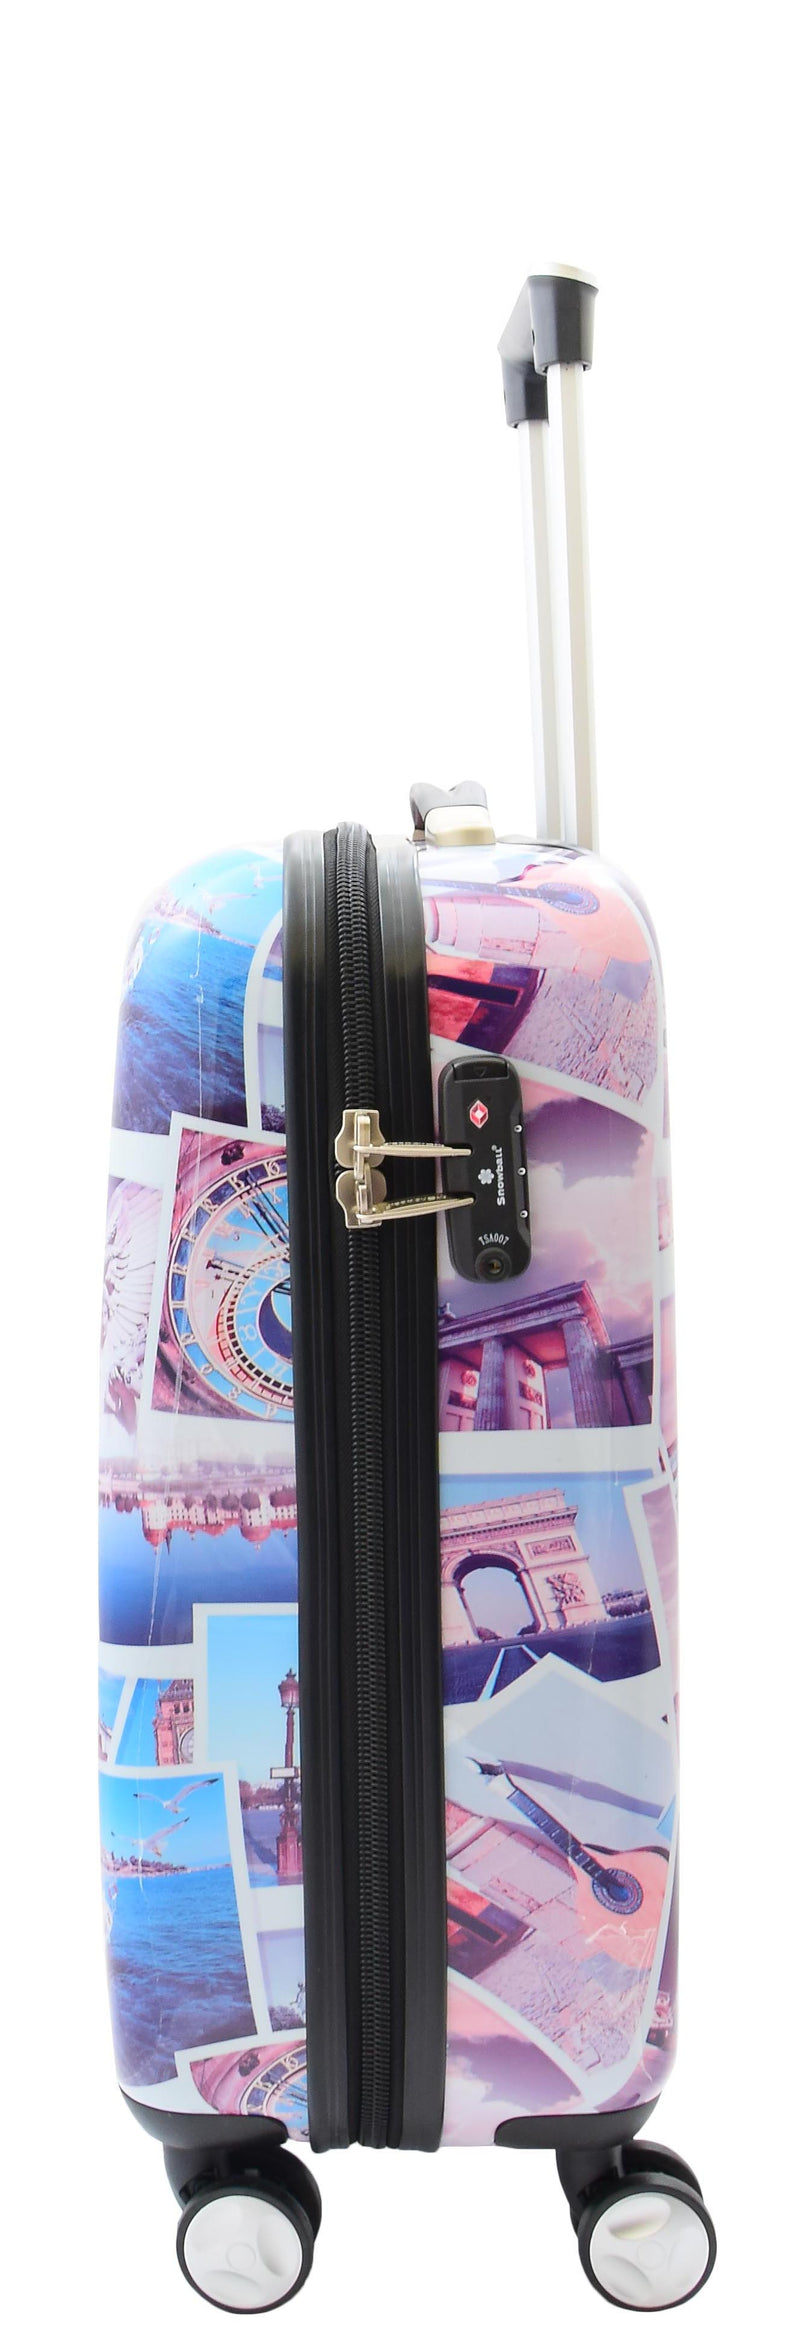 Four Wheel Suitcase Hard Shell Luggage Post Card Print